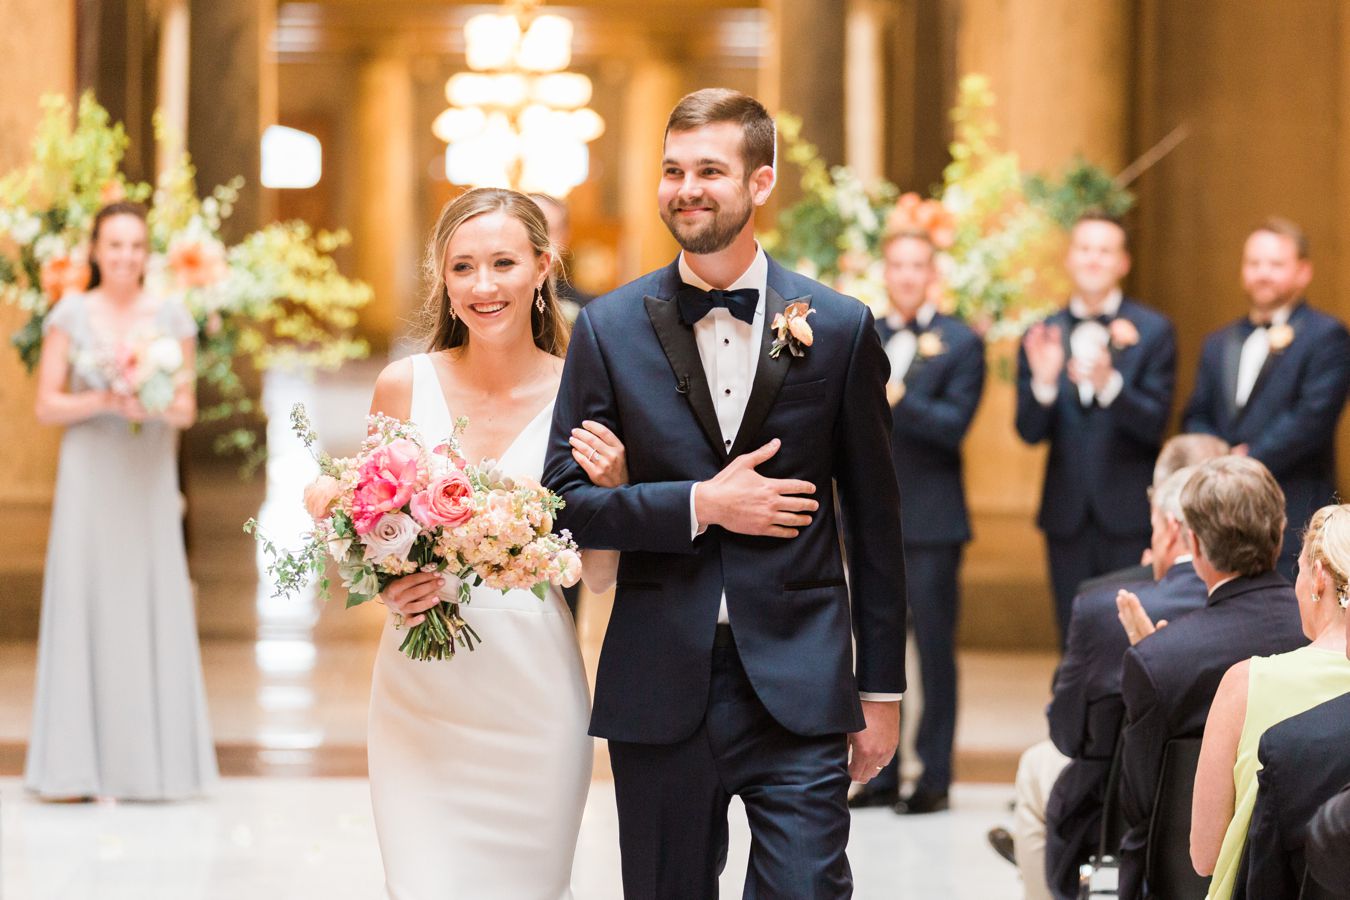 State Capital Building Indianapolis Wedding Photography | Cory Weber Photography 